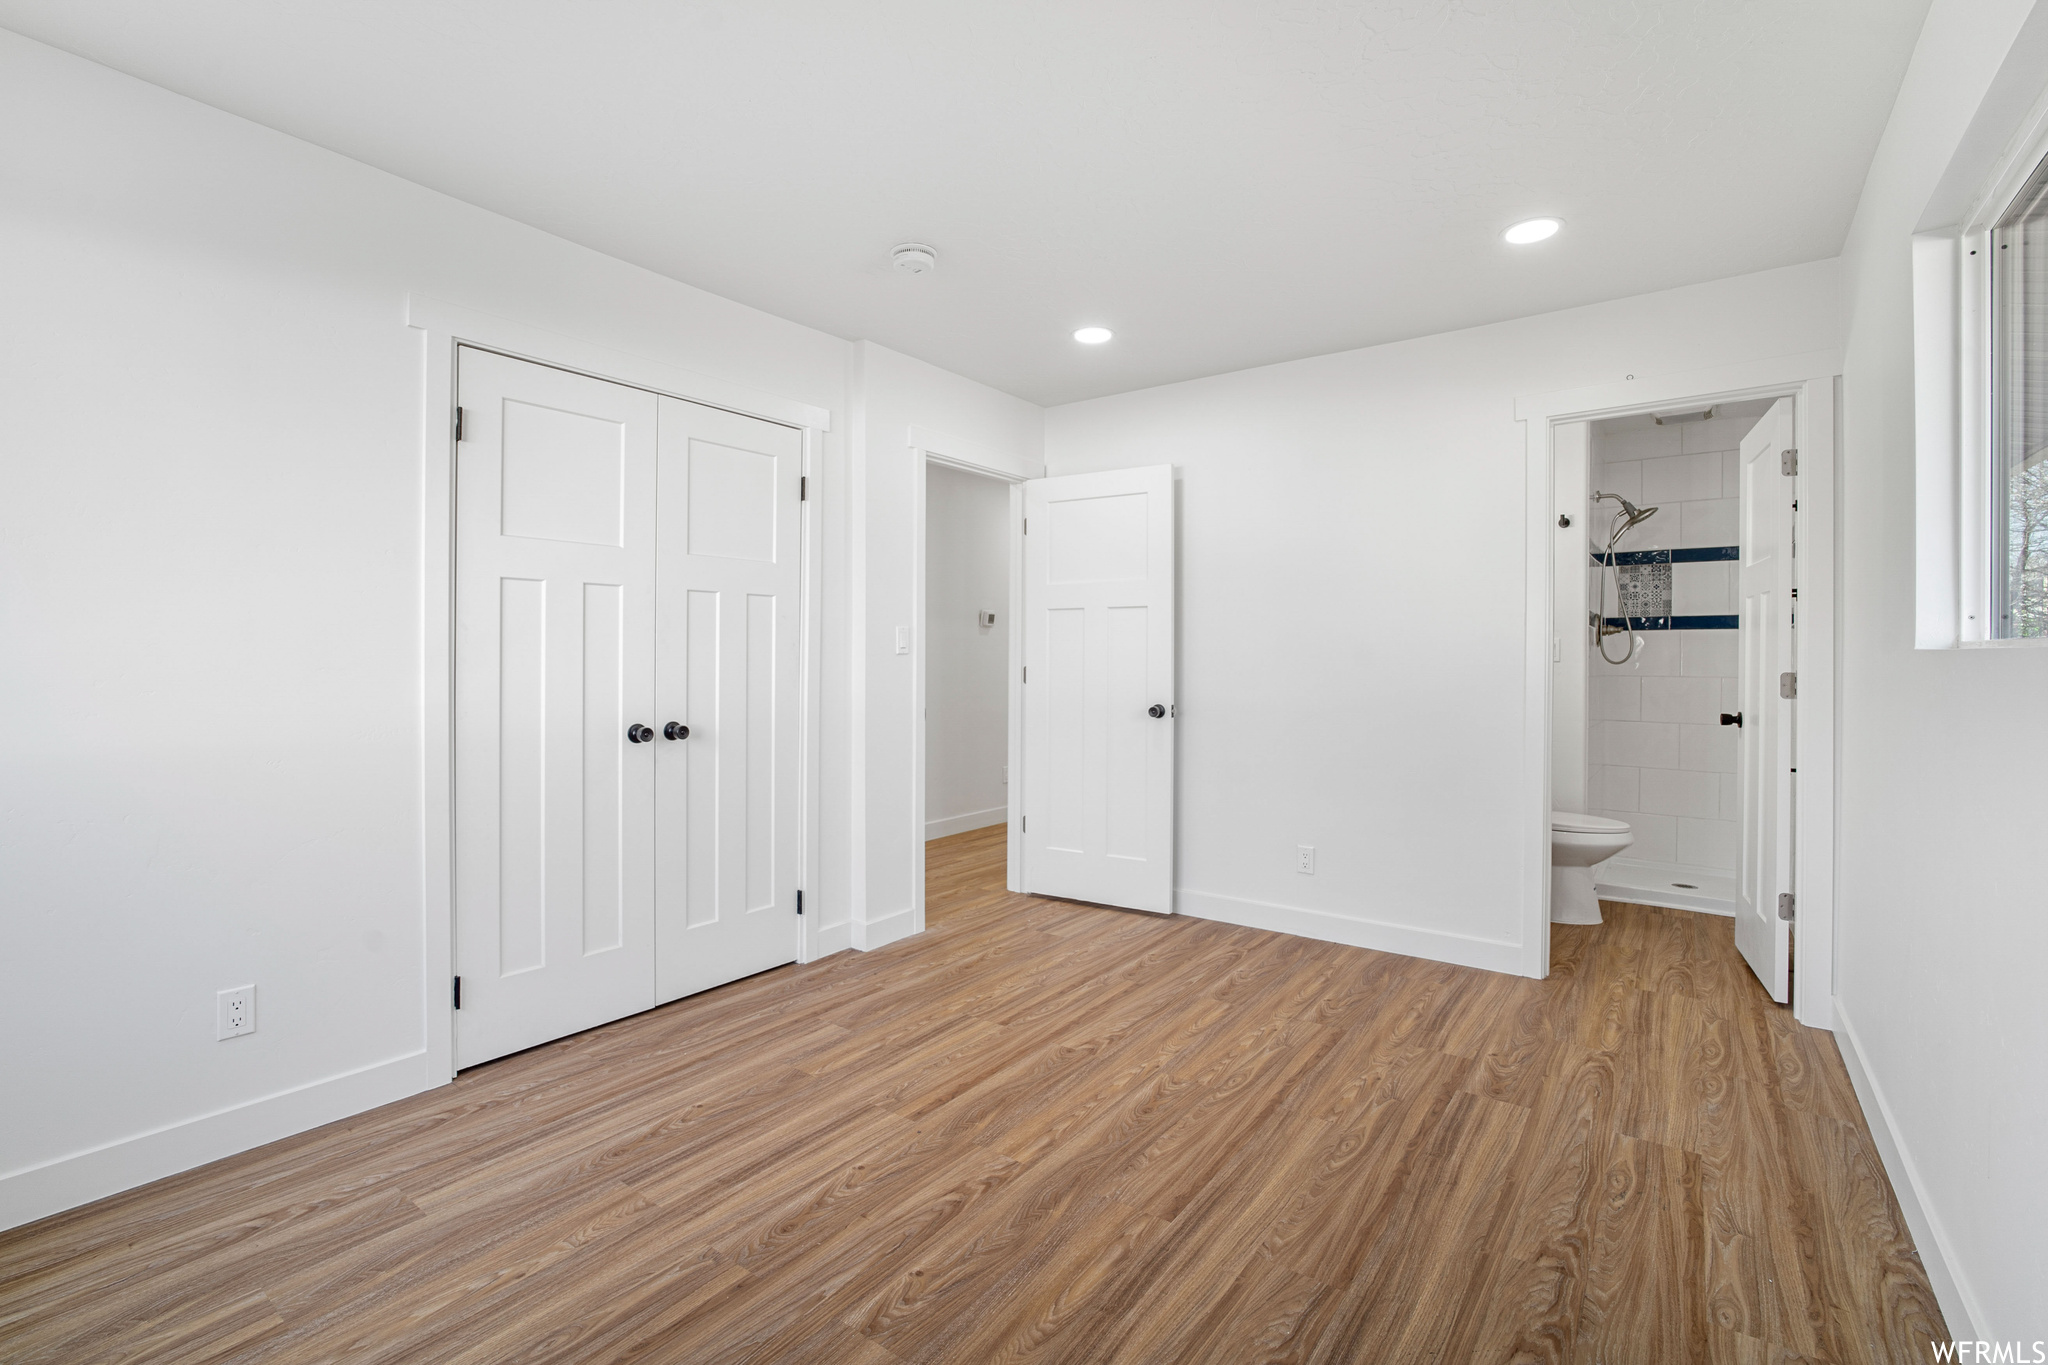 Unfurnished bedroom with ensuite bathroom, light hardwood / wood-style flooring, and a closet